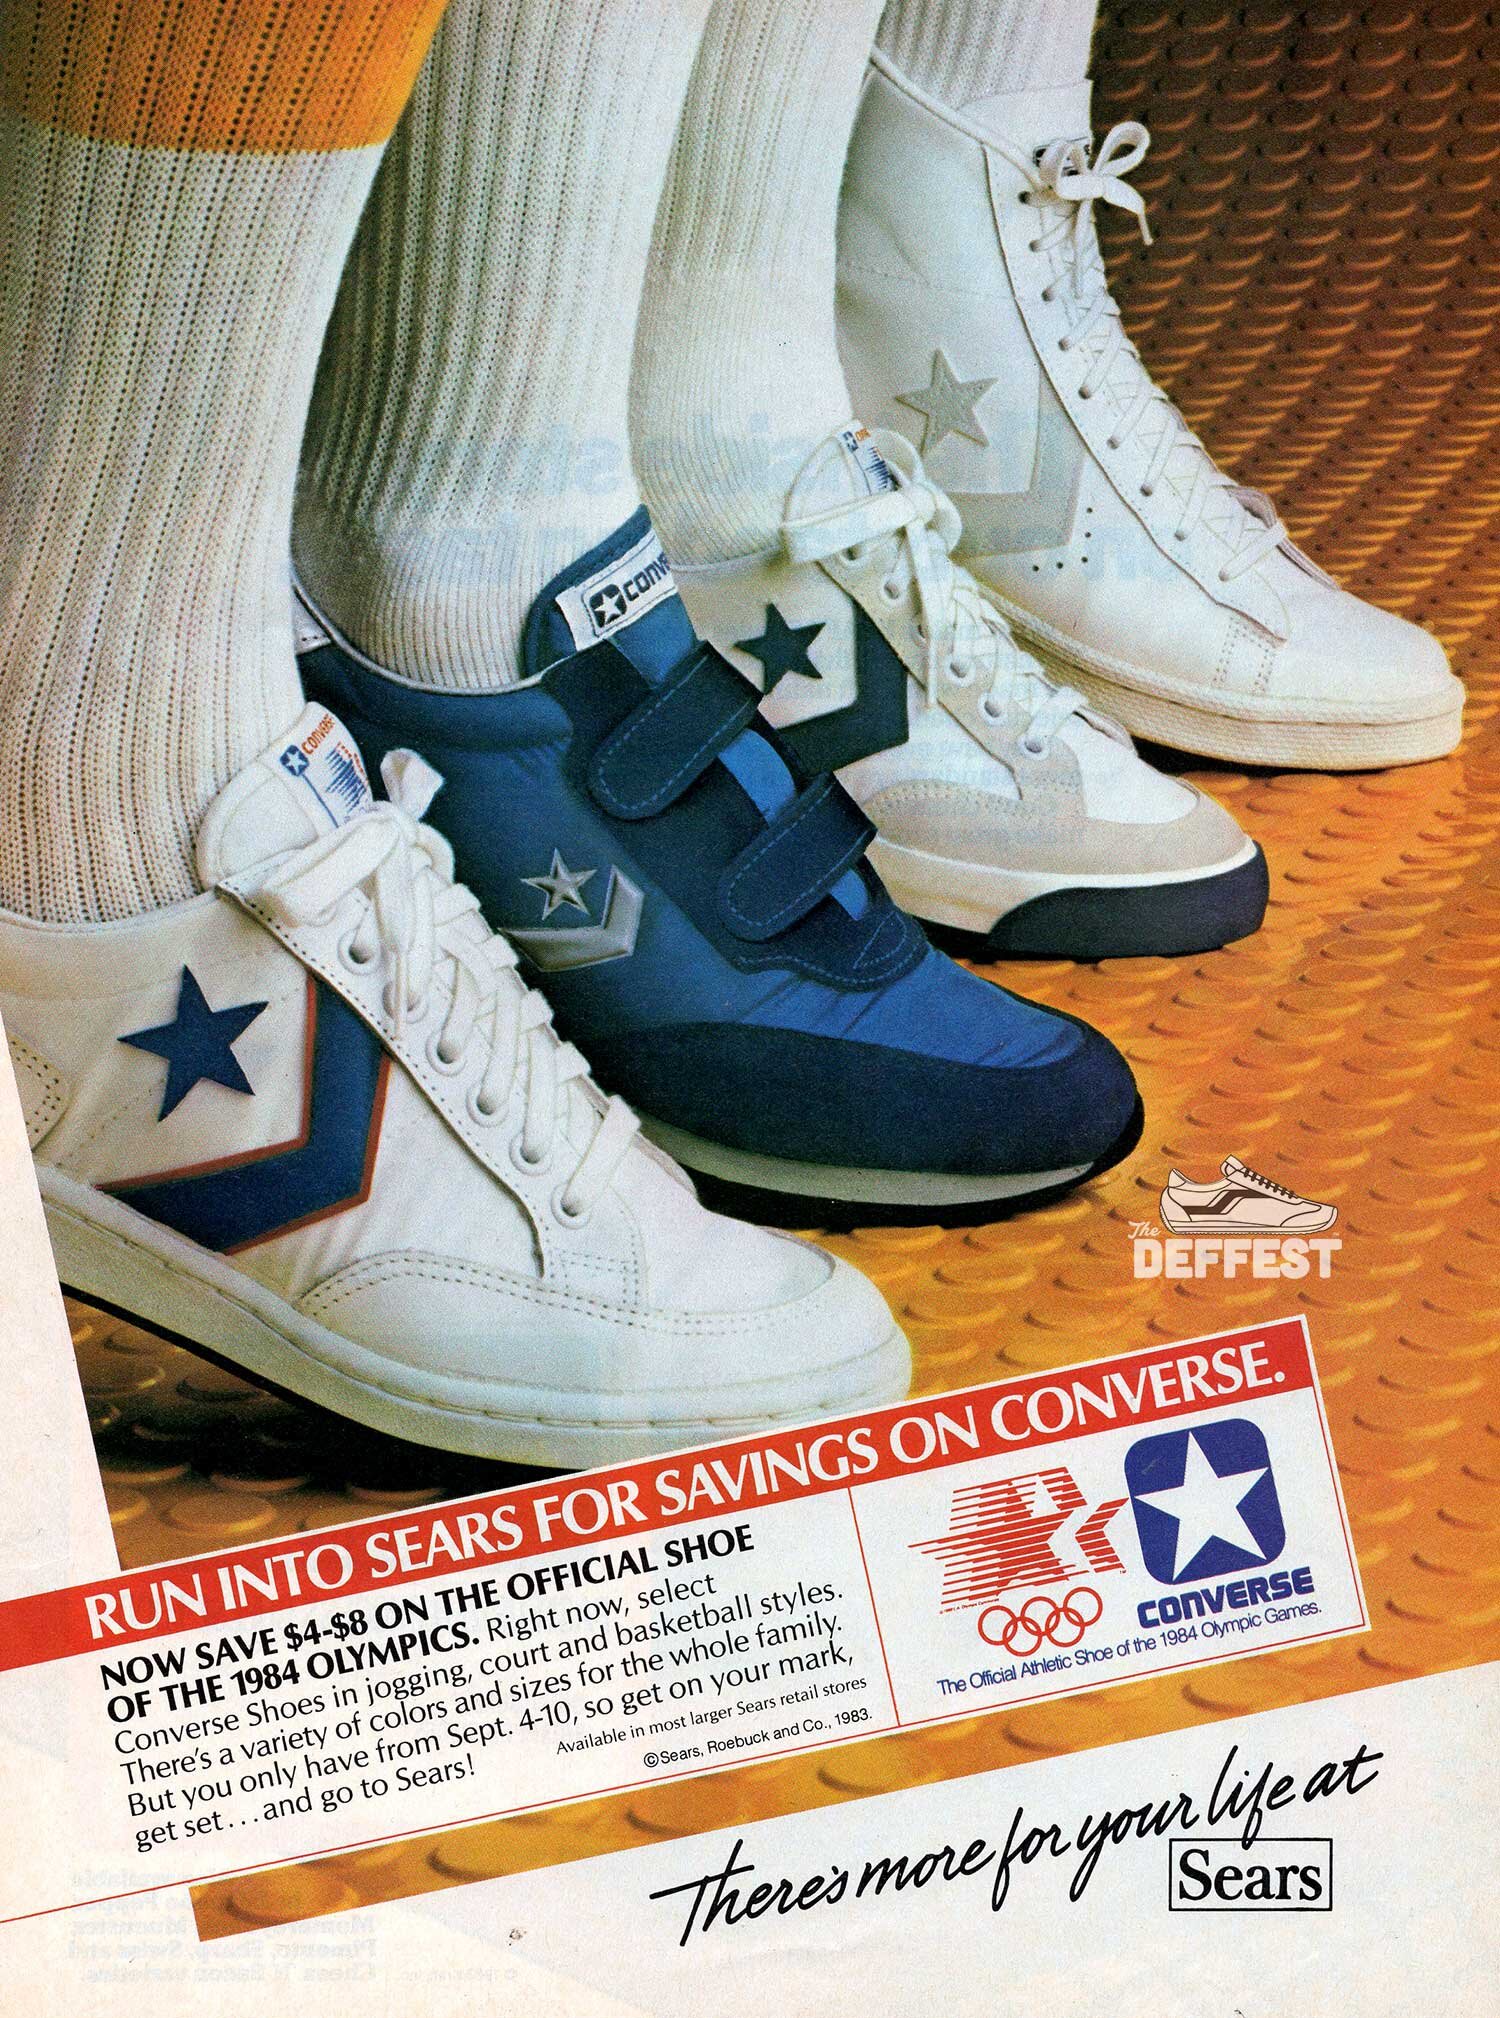 1980s converse sneakers — The A vintage and retro sneaker blog. — Vintage Ads